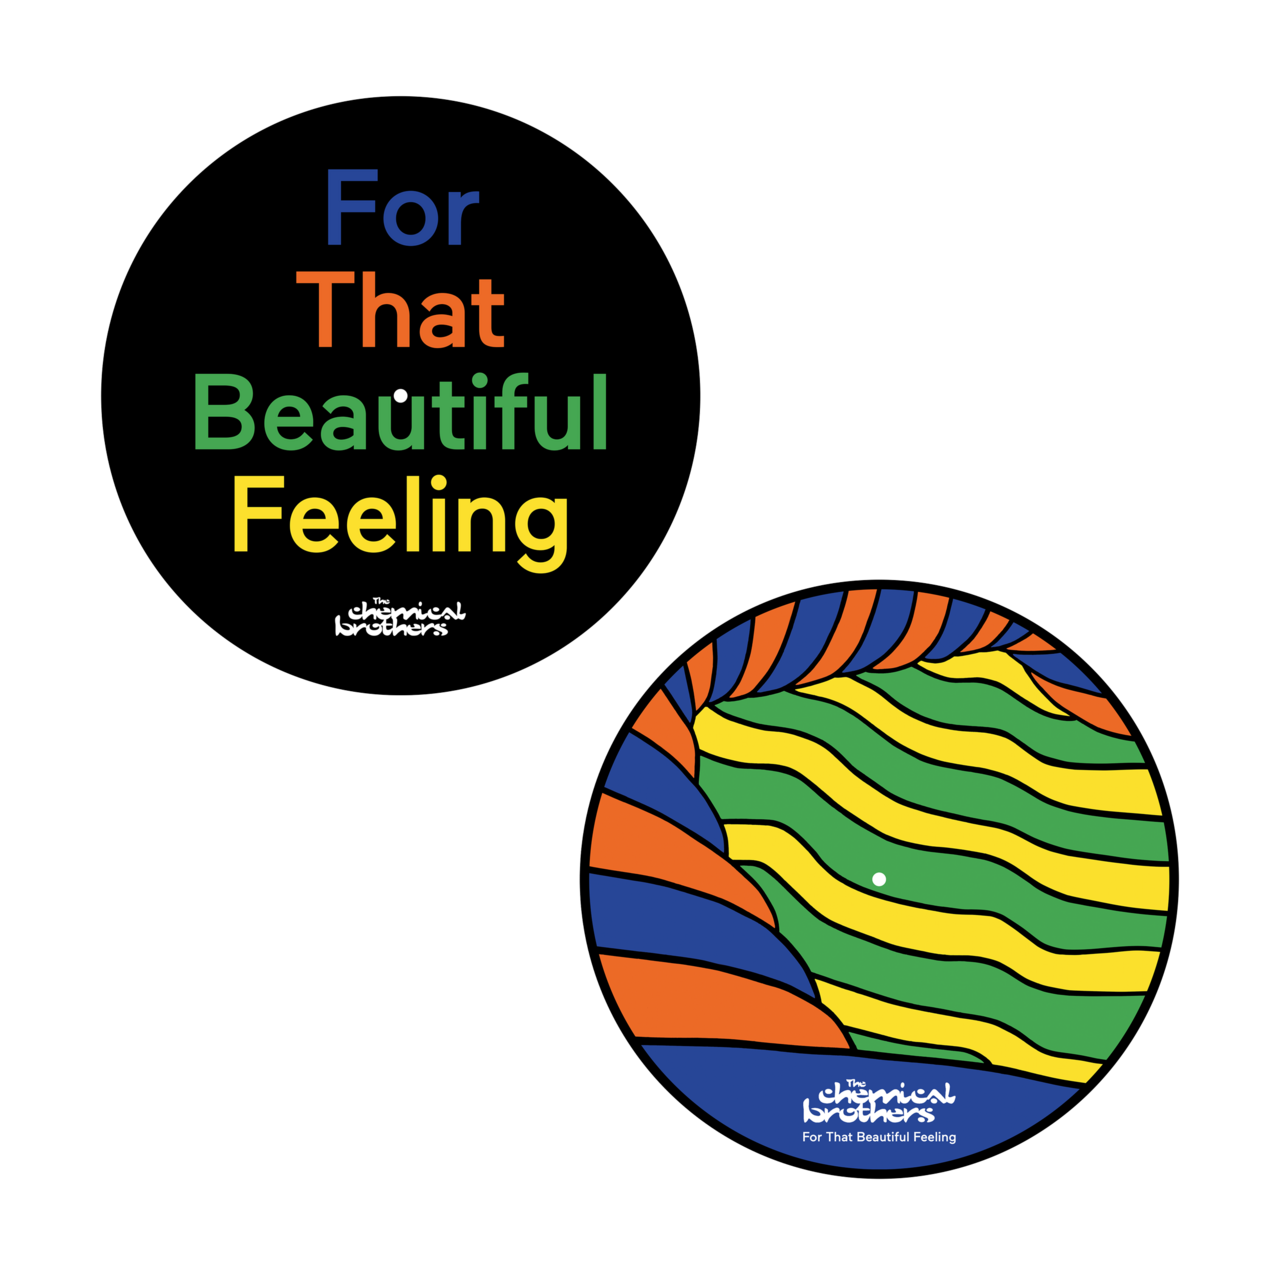 The Chemical Brothers - For That Beautiful Feeling Slipmats (Twin Pack)